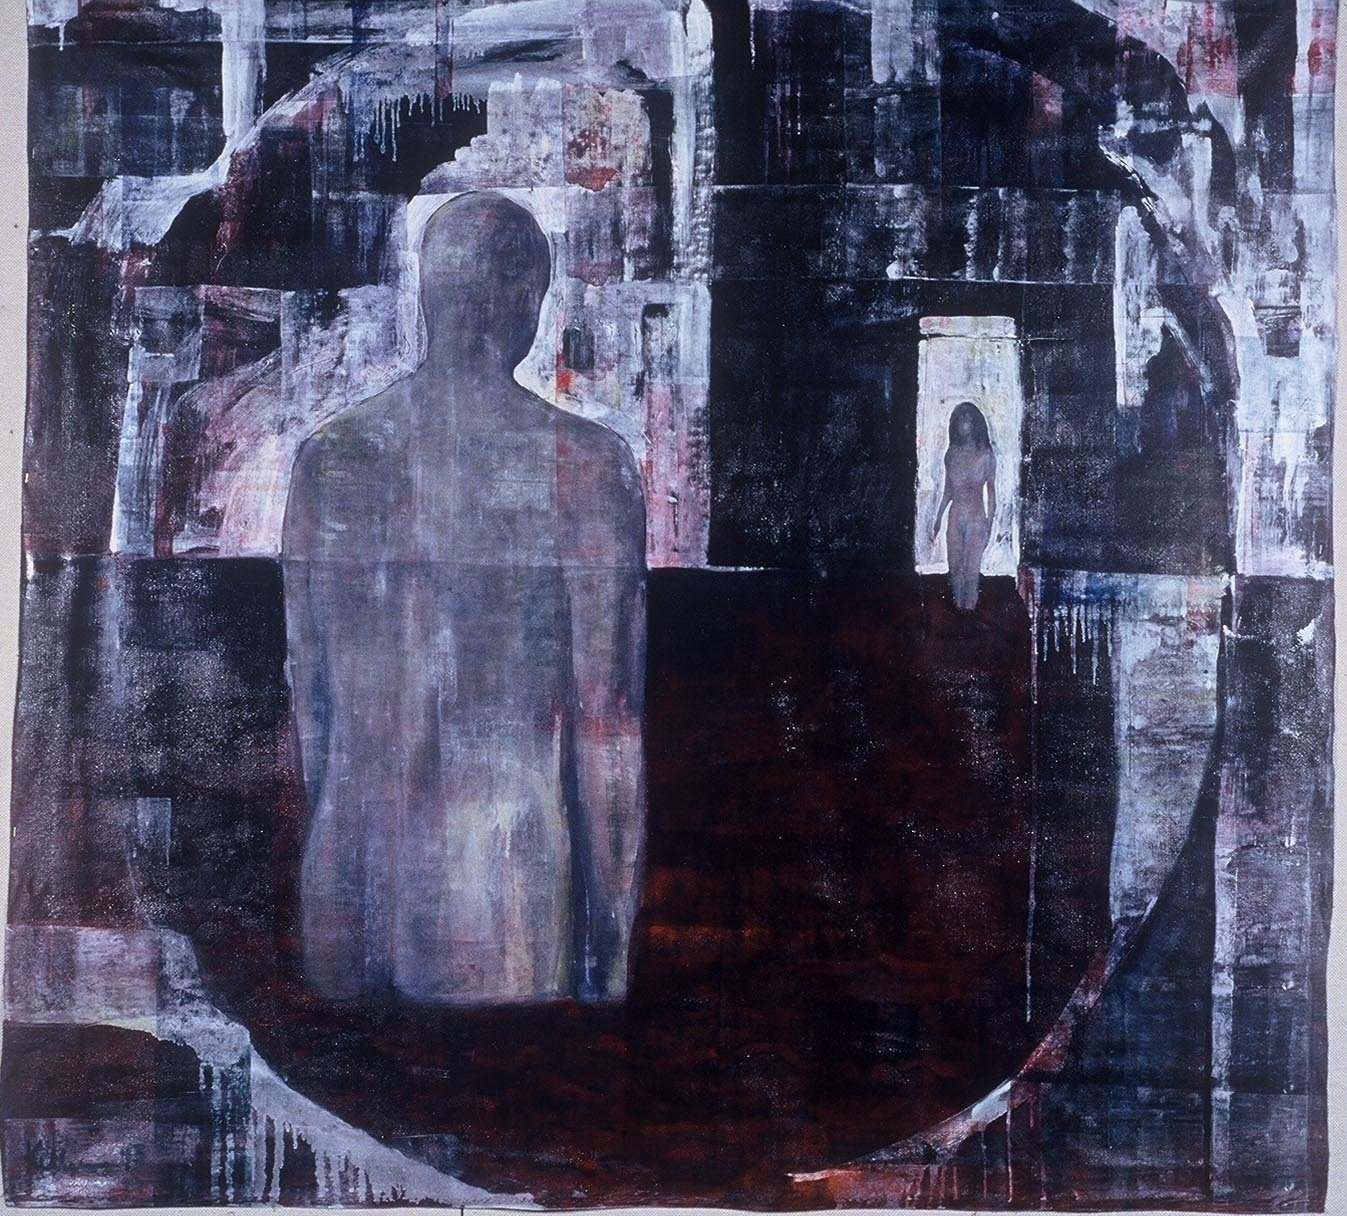 Between I, 1992, oil on canvas